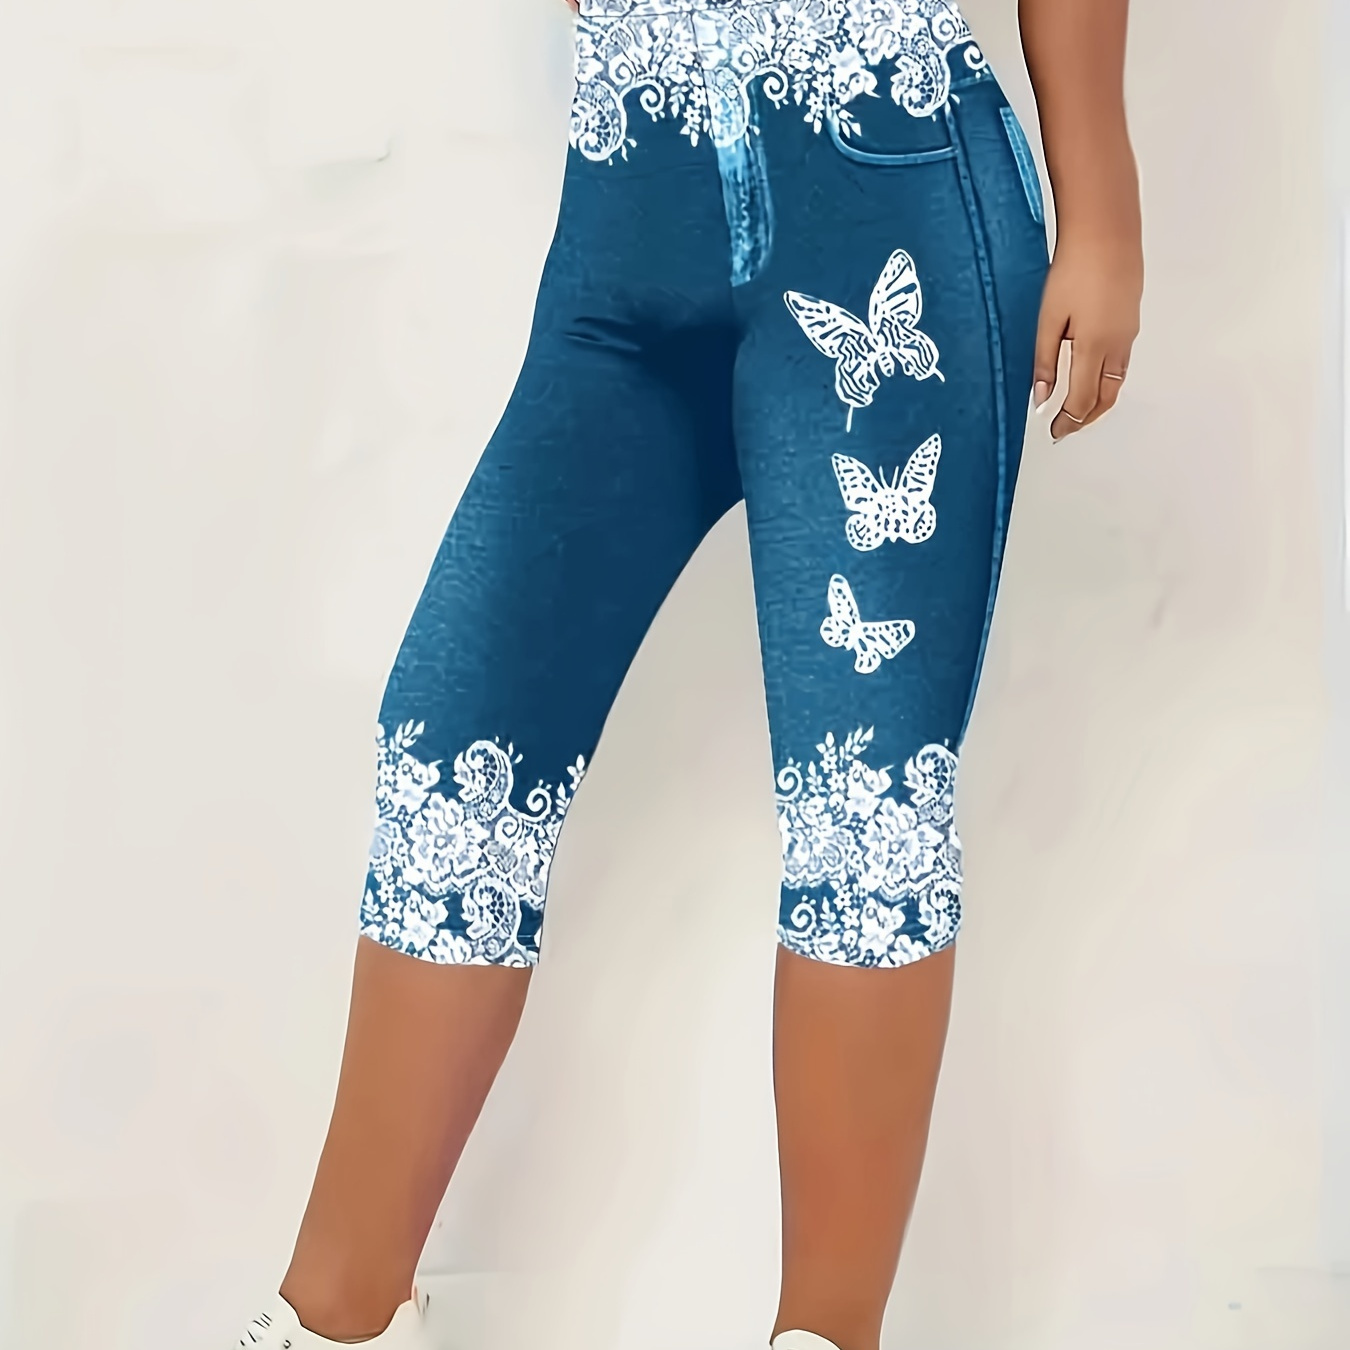 

Plus Size Floral & Butterfly Print Capri Leggings, Casual High Waist Stretchy Leggings For Spring & Summer, Women's Plus Size Clothing